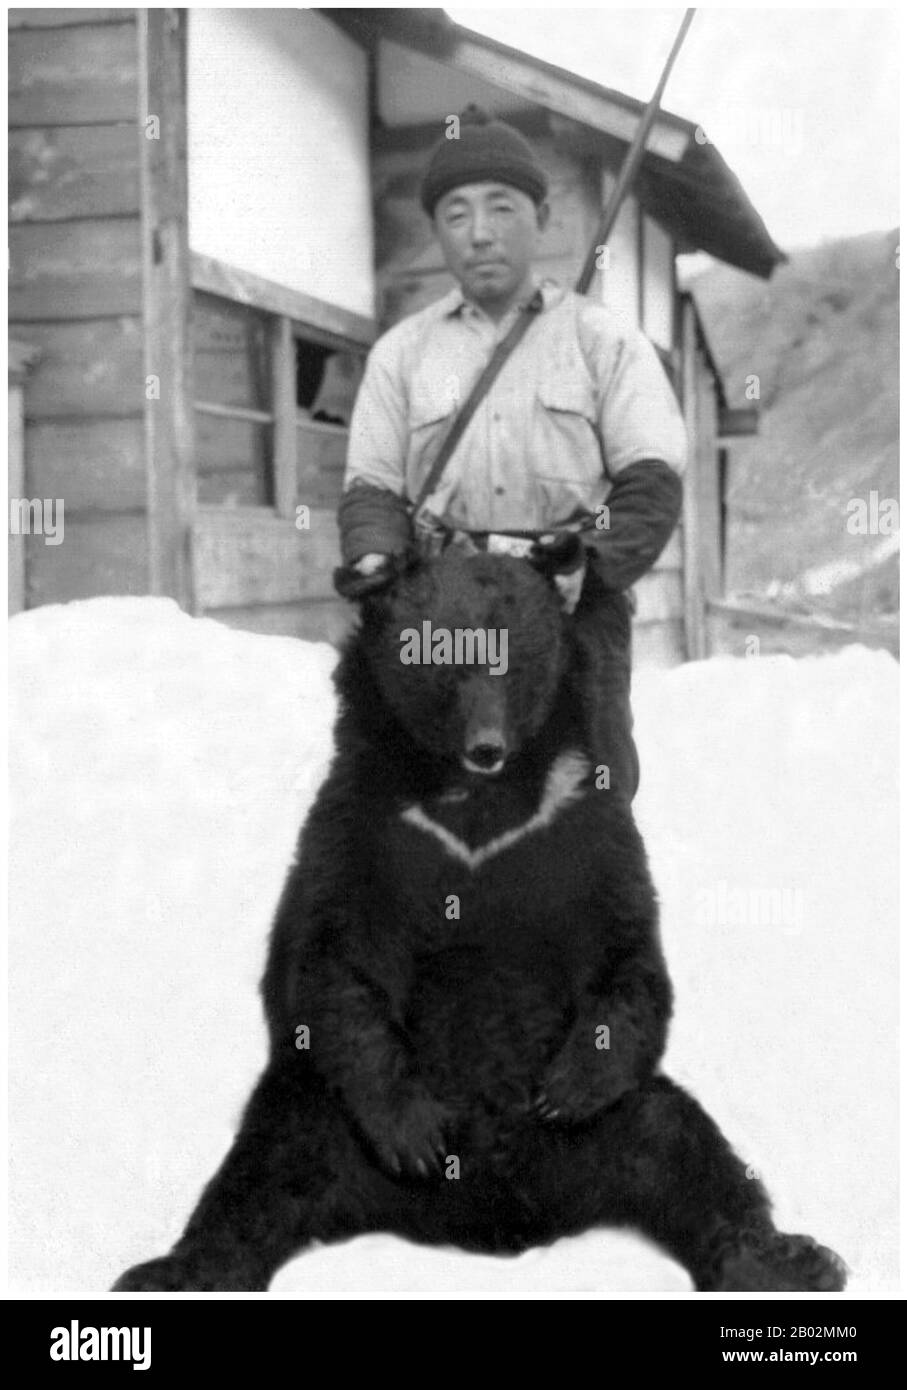 The Matagi (Japanese: 又鬼) are traditional winter hunters of the Tōhoku region of northern Japan, most famously today in the Shirakami-Sanchi forest between Akita and Aomori. They hunt deer and bear, and their culture has much in common with the bear cult of the Ainu.   They live in small hamlets of the mountain beech forests of Tōhoku and engage in agriculture during the planting and harvest season. In the winter and early spring, they form hunting bands that spend weeks at a time in the forest. With the introduction of guns in the 20th century, the need for group hunting for bear has diminish Stock Photo